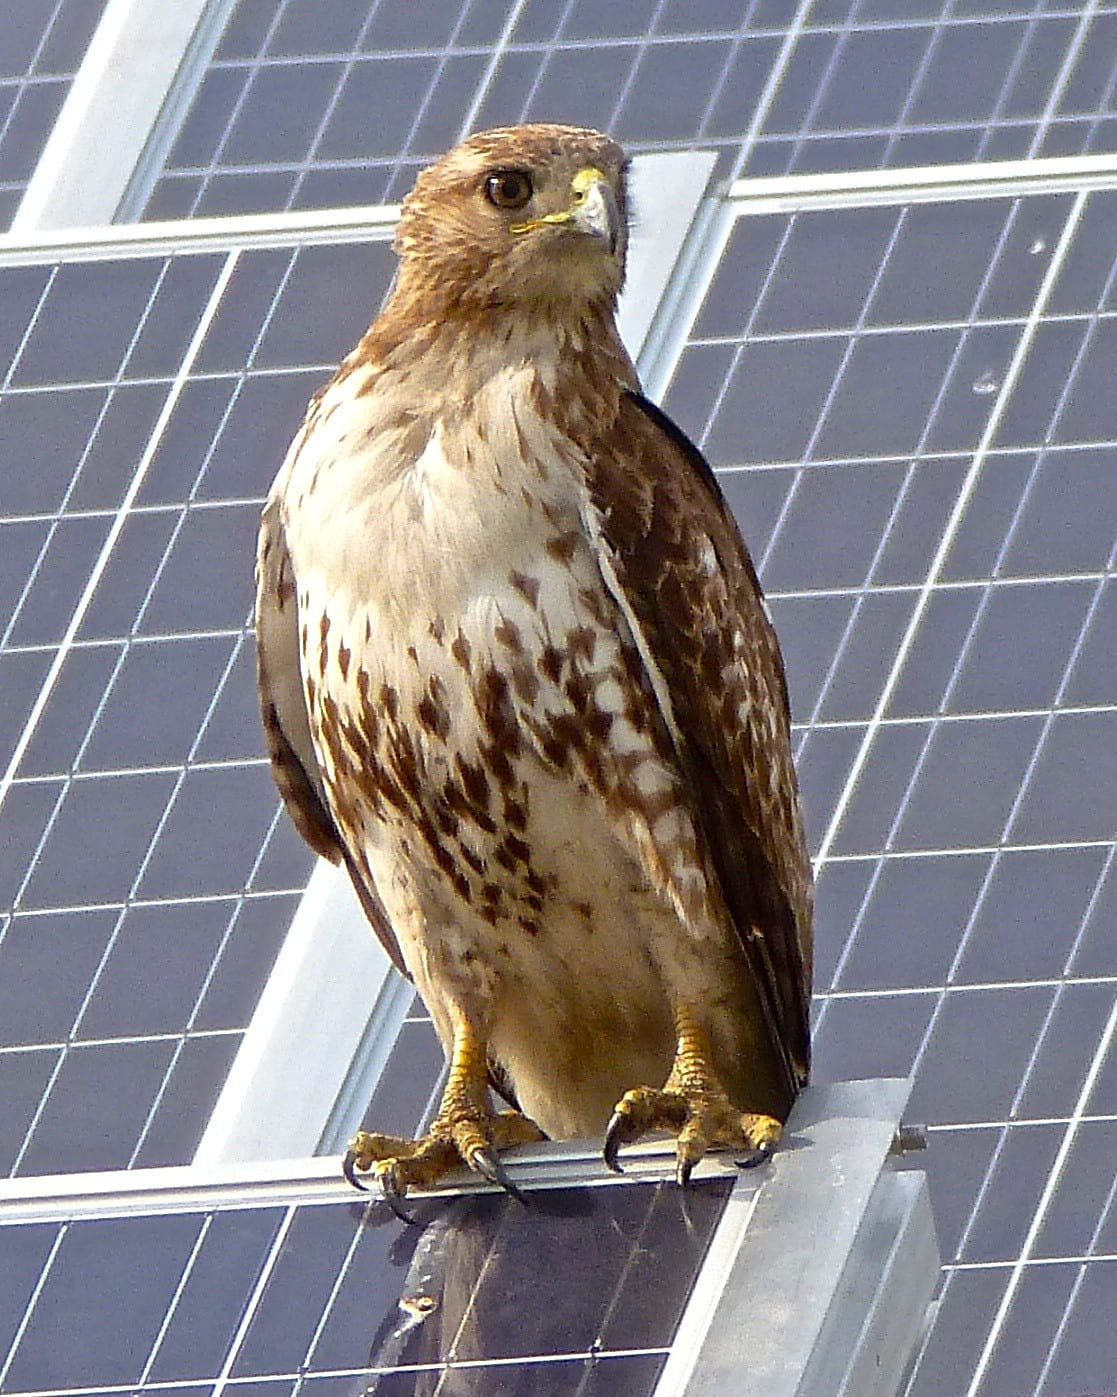 Red-tailed hawk perched on the edge of a solar panel. Credit: Deb Nystrom, Flickr, Licensed under CC BY 2.0